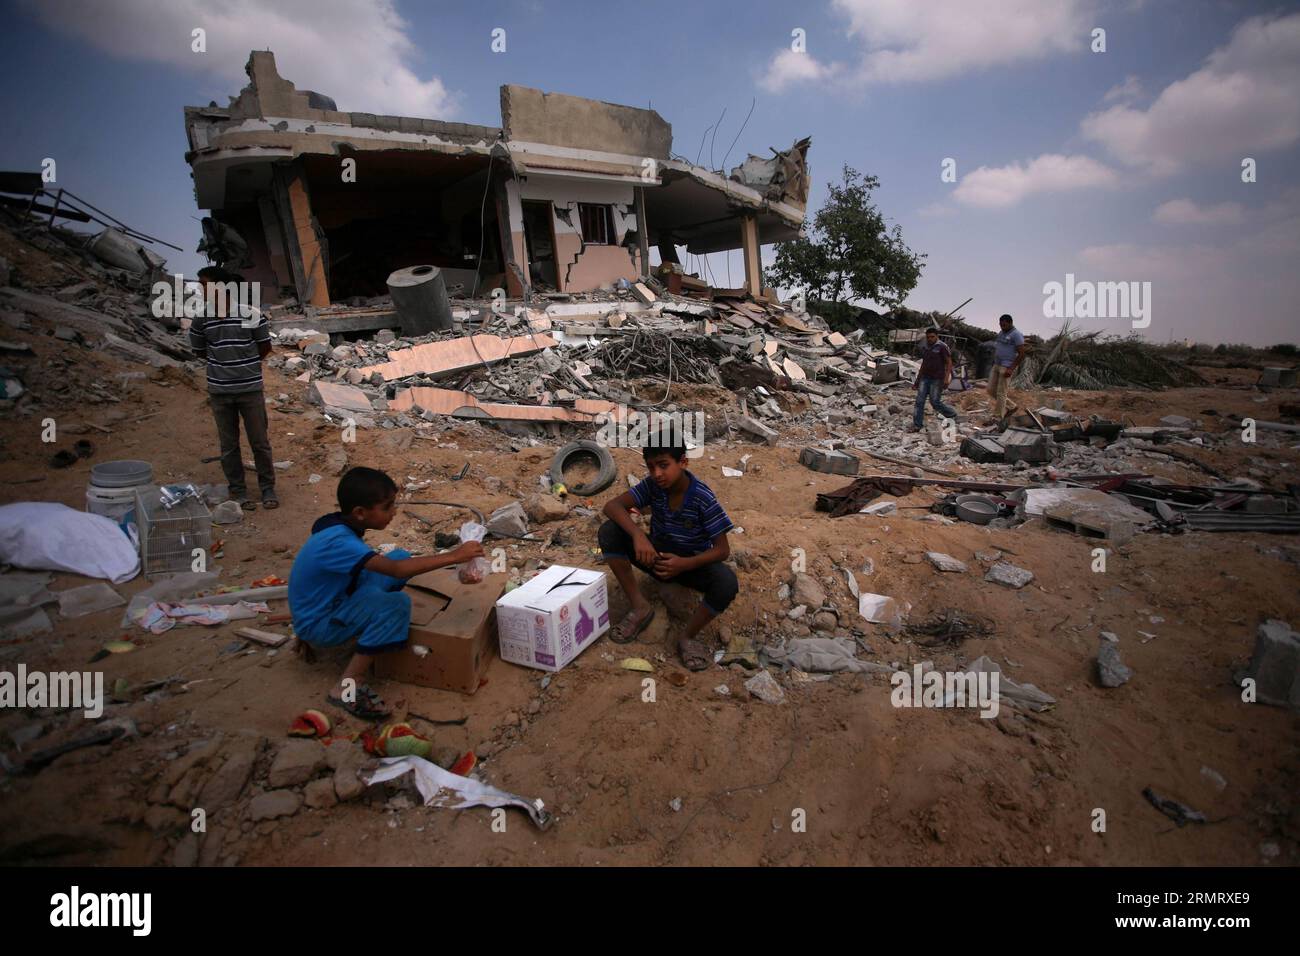 (140805) -- GAZA, Aug. 5, 2014 -- Palestinians collect belongings from their destroyed house after it was hit by an Israeli strike, in Khuzaa village, east of Khan Younis, in the southern Gaza Strip, on Aug. 5, 2014. A 72-hour ceasefire in the Gaza Strip brokered by Egypt came into effect at 8:00 a.m. local time (0500 GMT) on Tuesday, marking the latest attempt to stop the Israeli-Palestinian clashes after previous efforts ended in failure. ) MIDEAST-GAZA-CEASEFIRE YasserxQudih PUBLICATIONxNOTxINxCHN   Gaza Aug 5 2014 PALESTINIANS Collect belonging from their destroyed House After IT what Hit Stock Photo